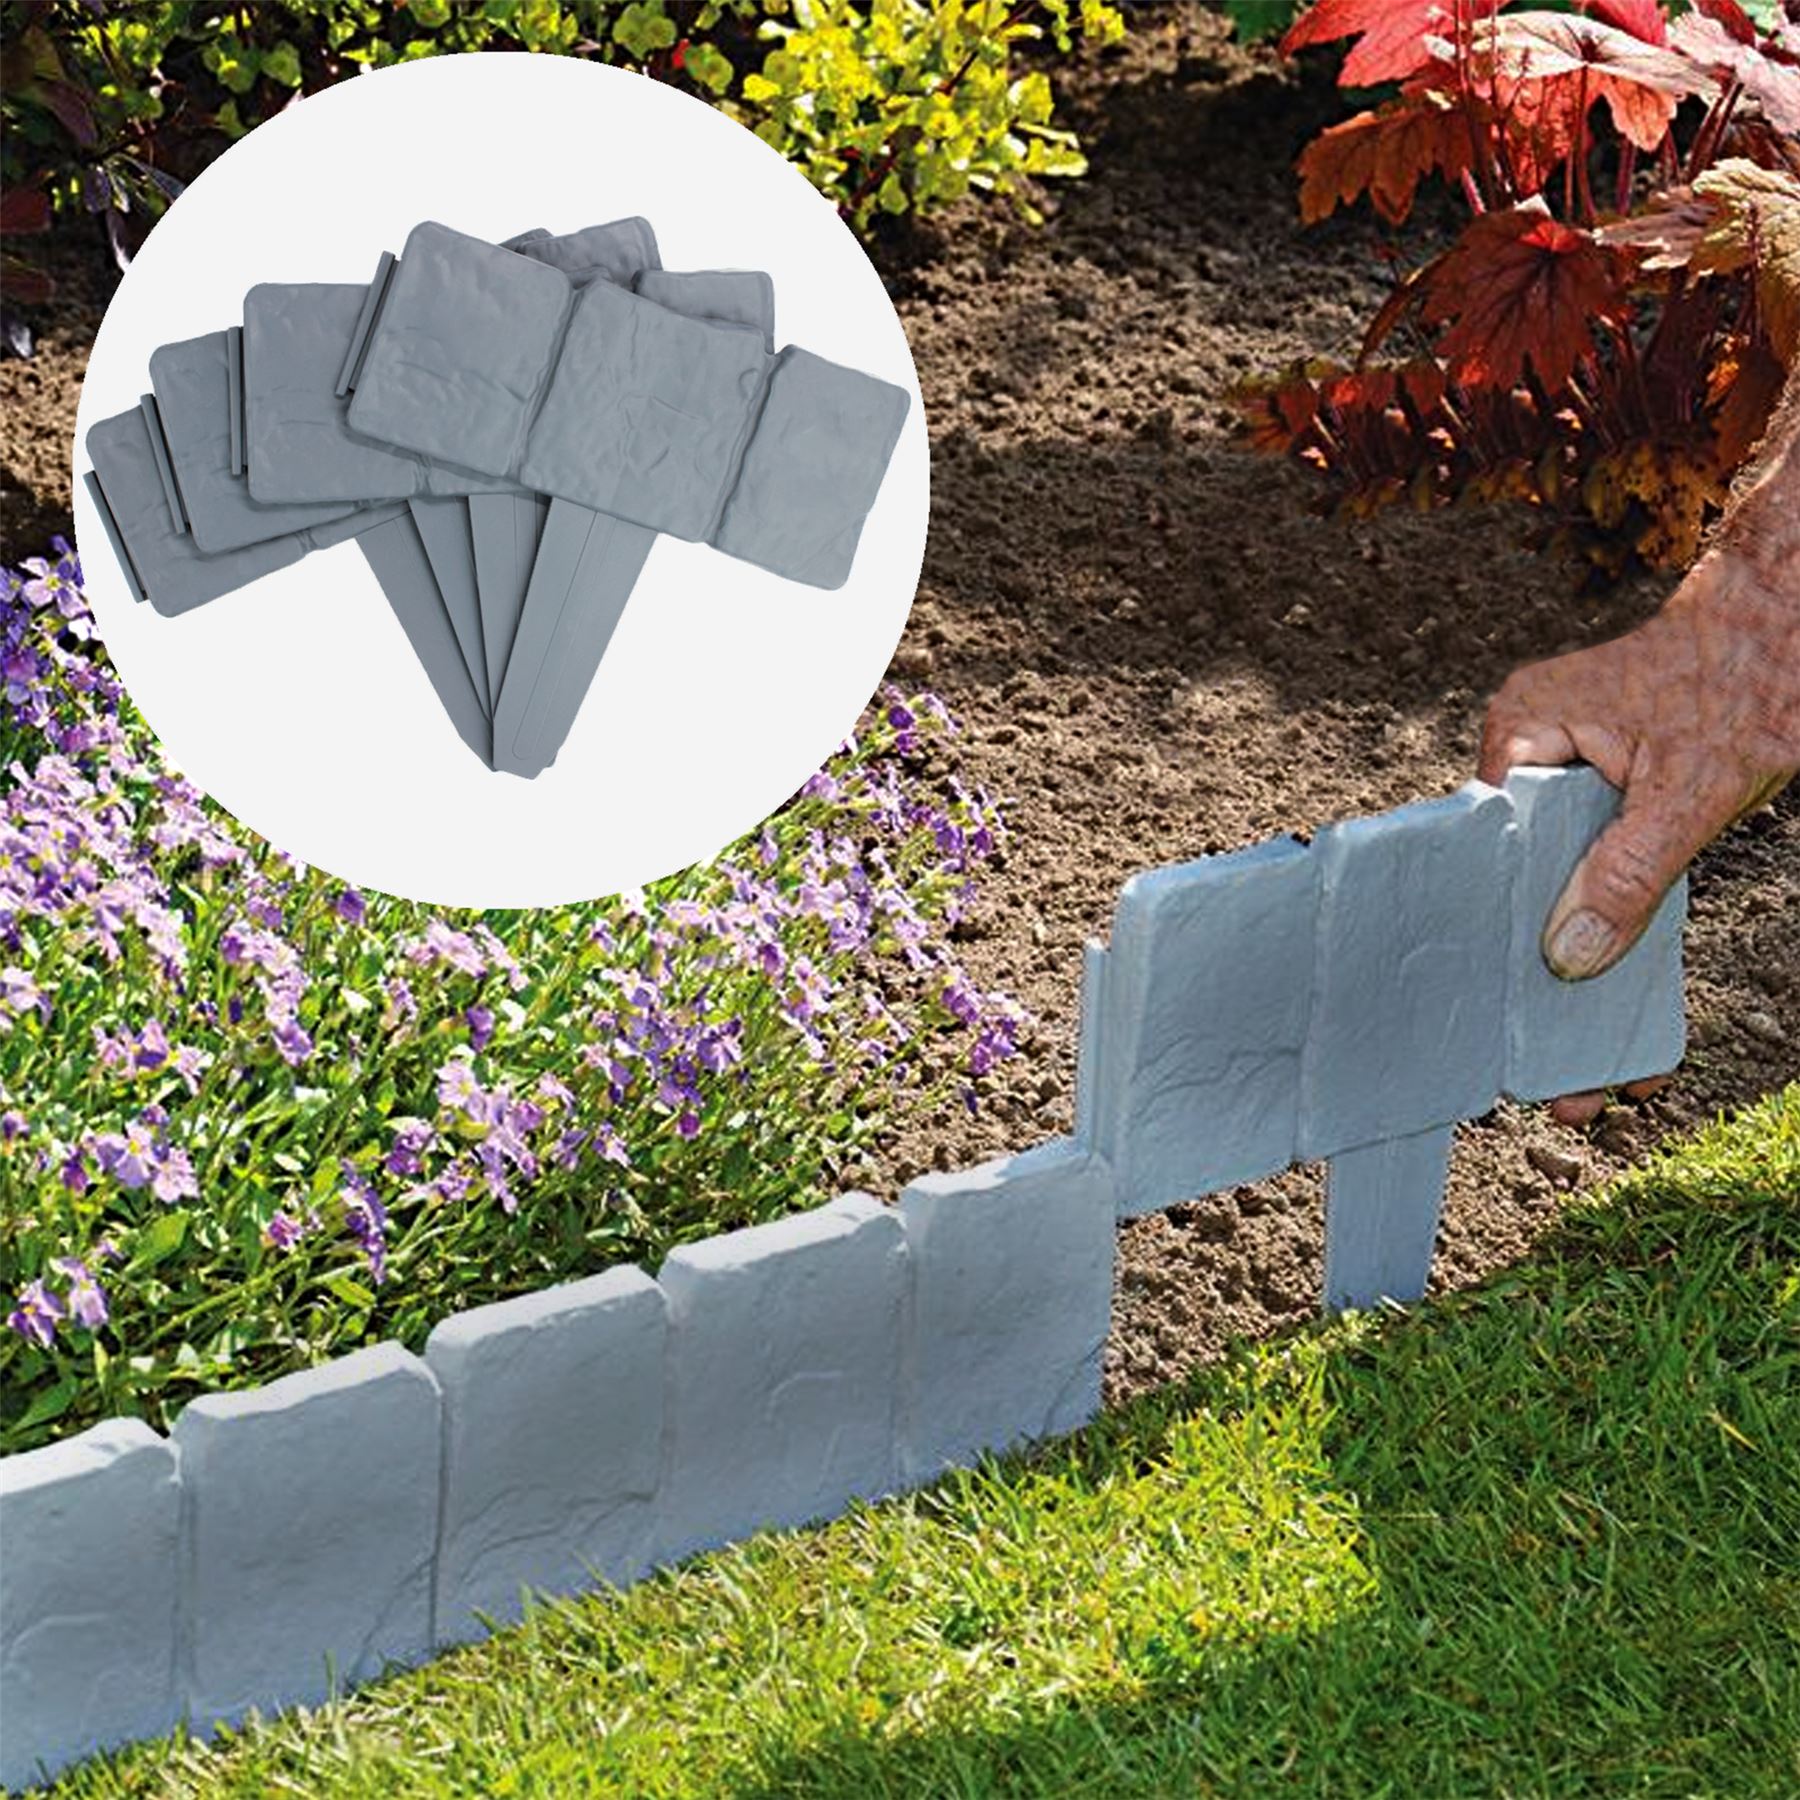 Stone Effect Lawn Edging Grey 5M - Pack of 20 | Pukkr